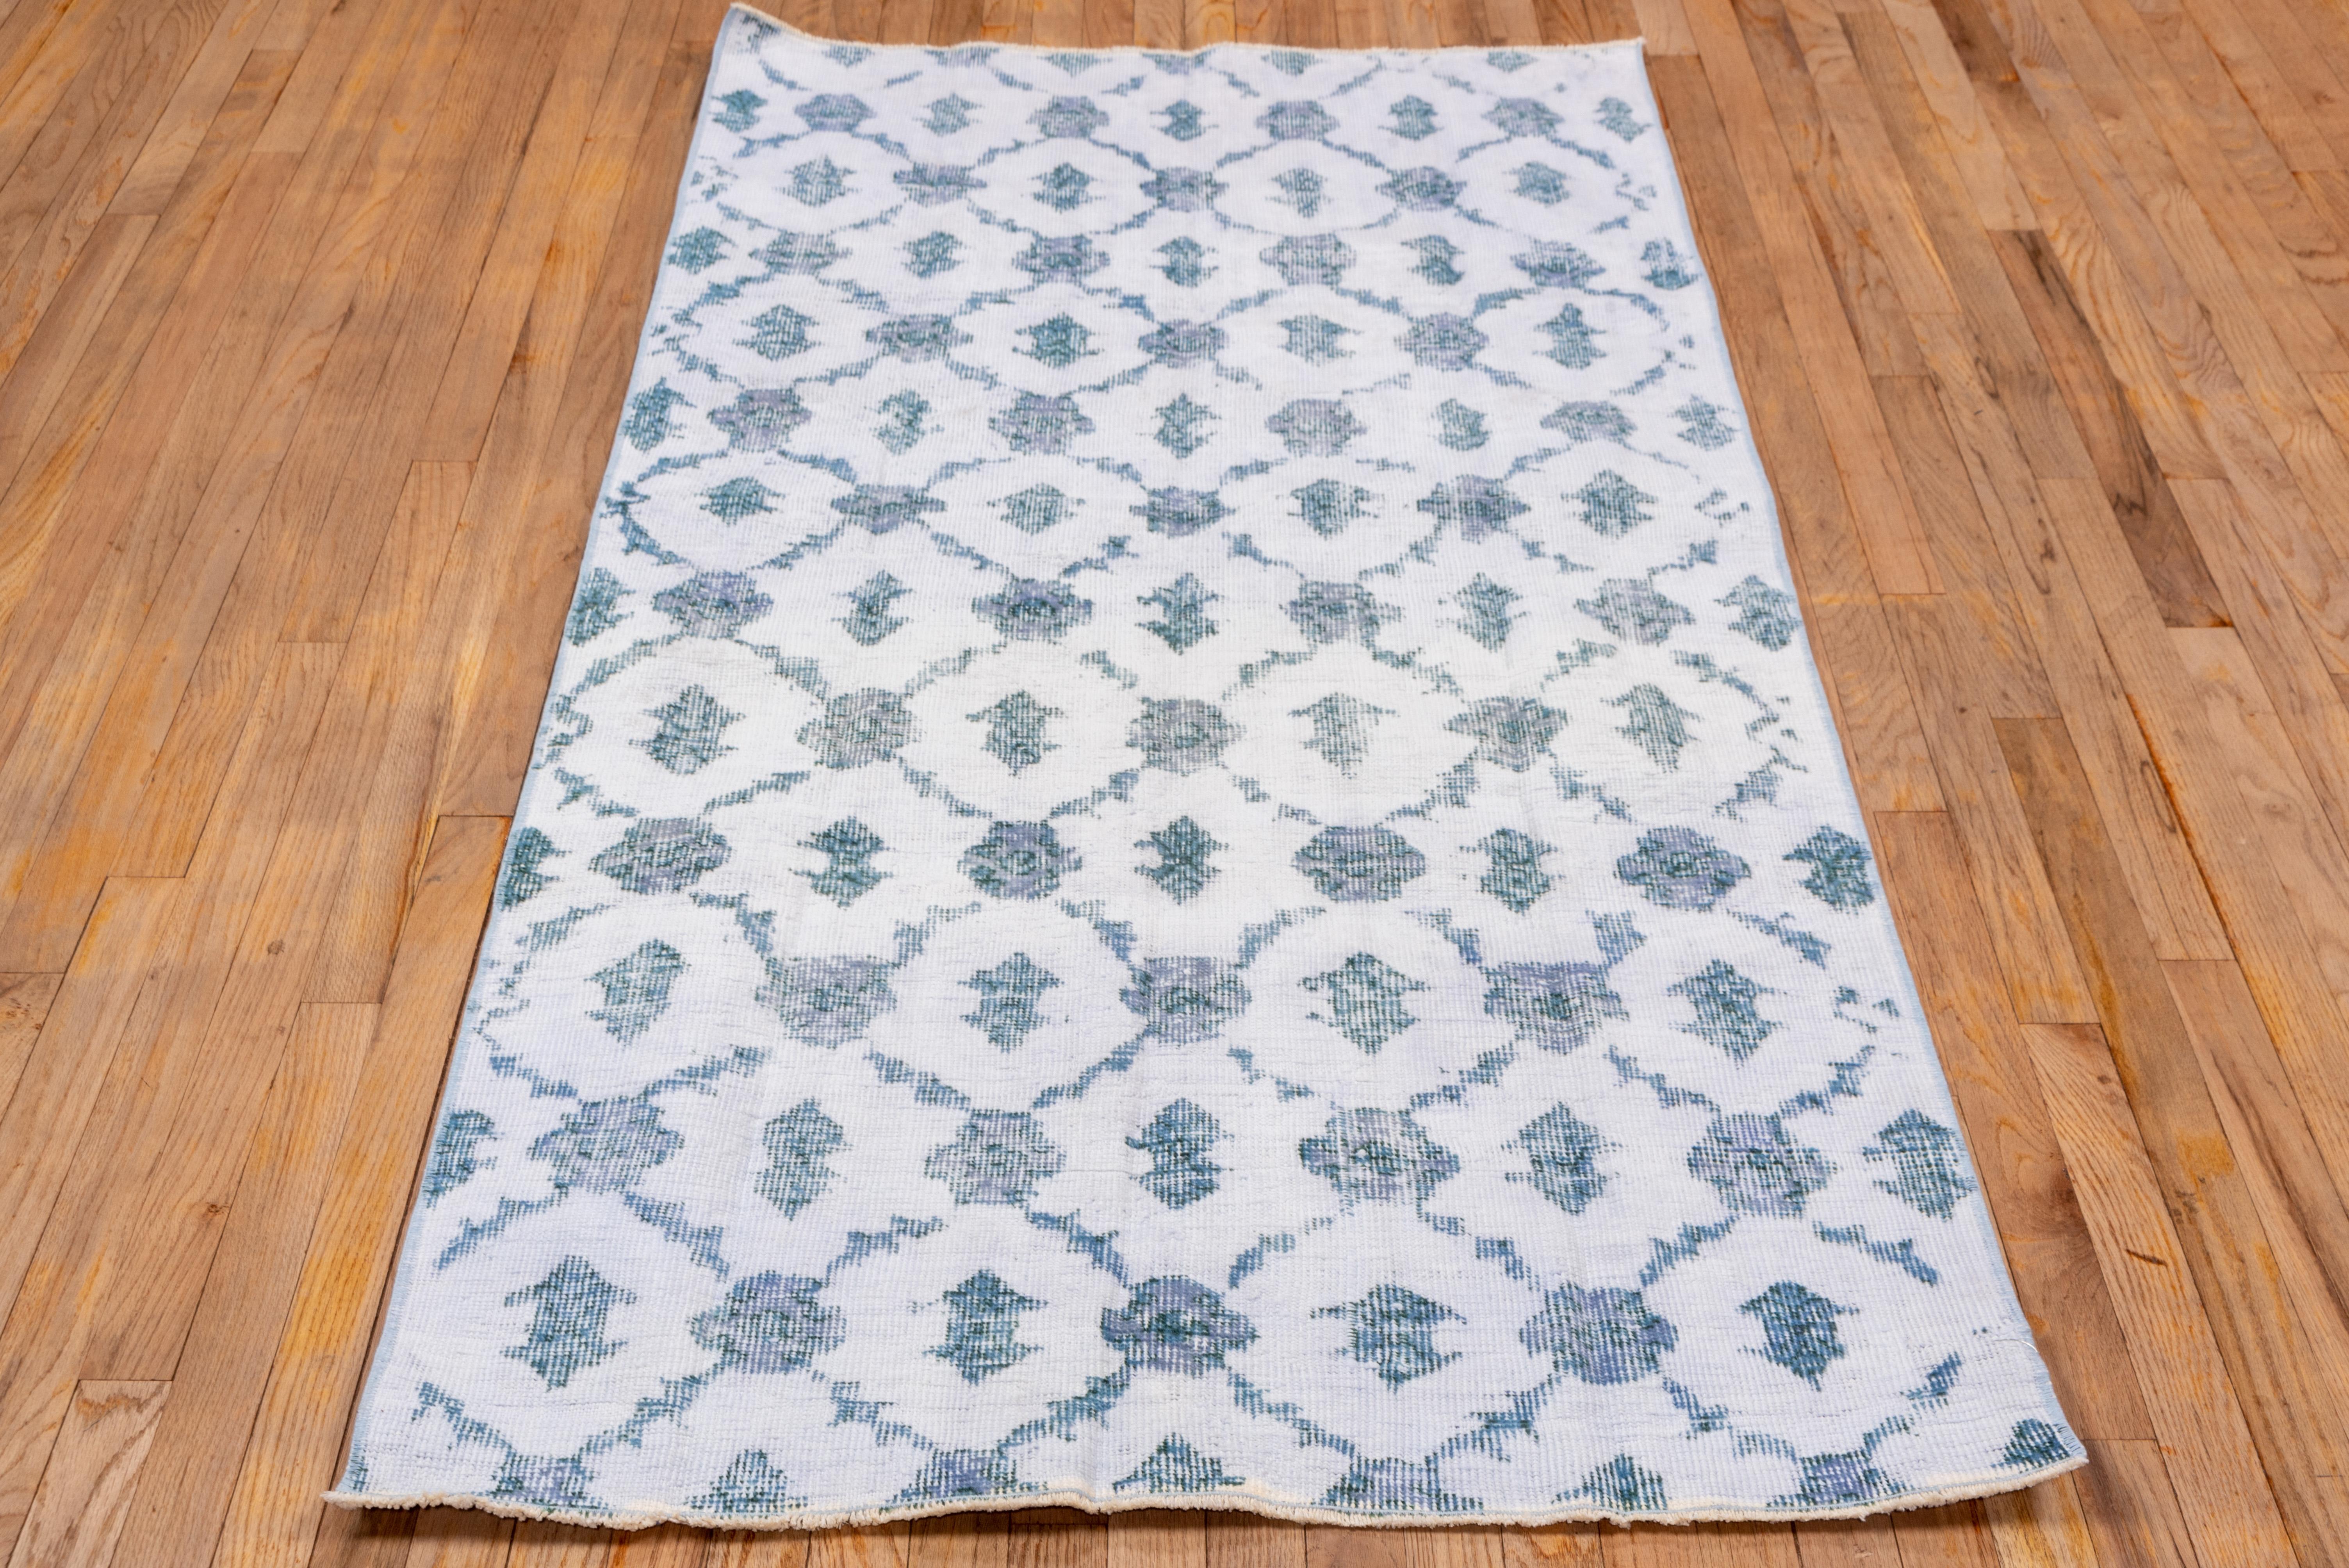 Uniique Shabby Chic Turkish Oushak Scatter Rug, Blue Allover Design In Good Condition For Sale In New York, NY